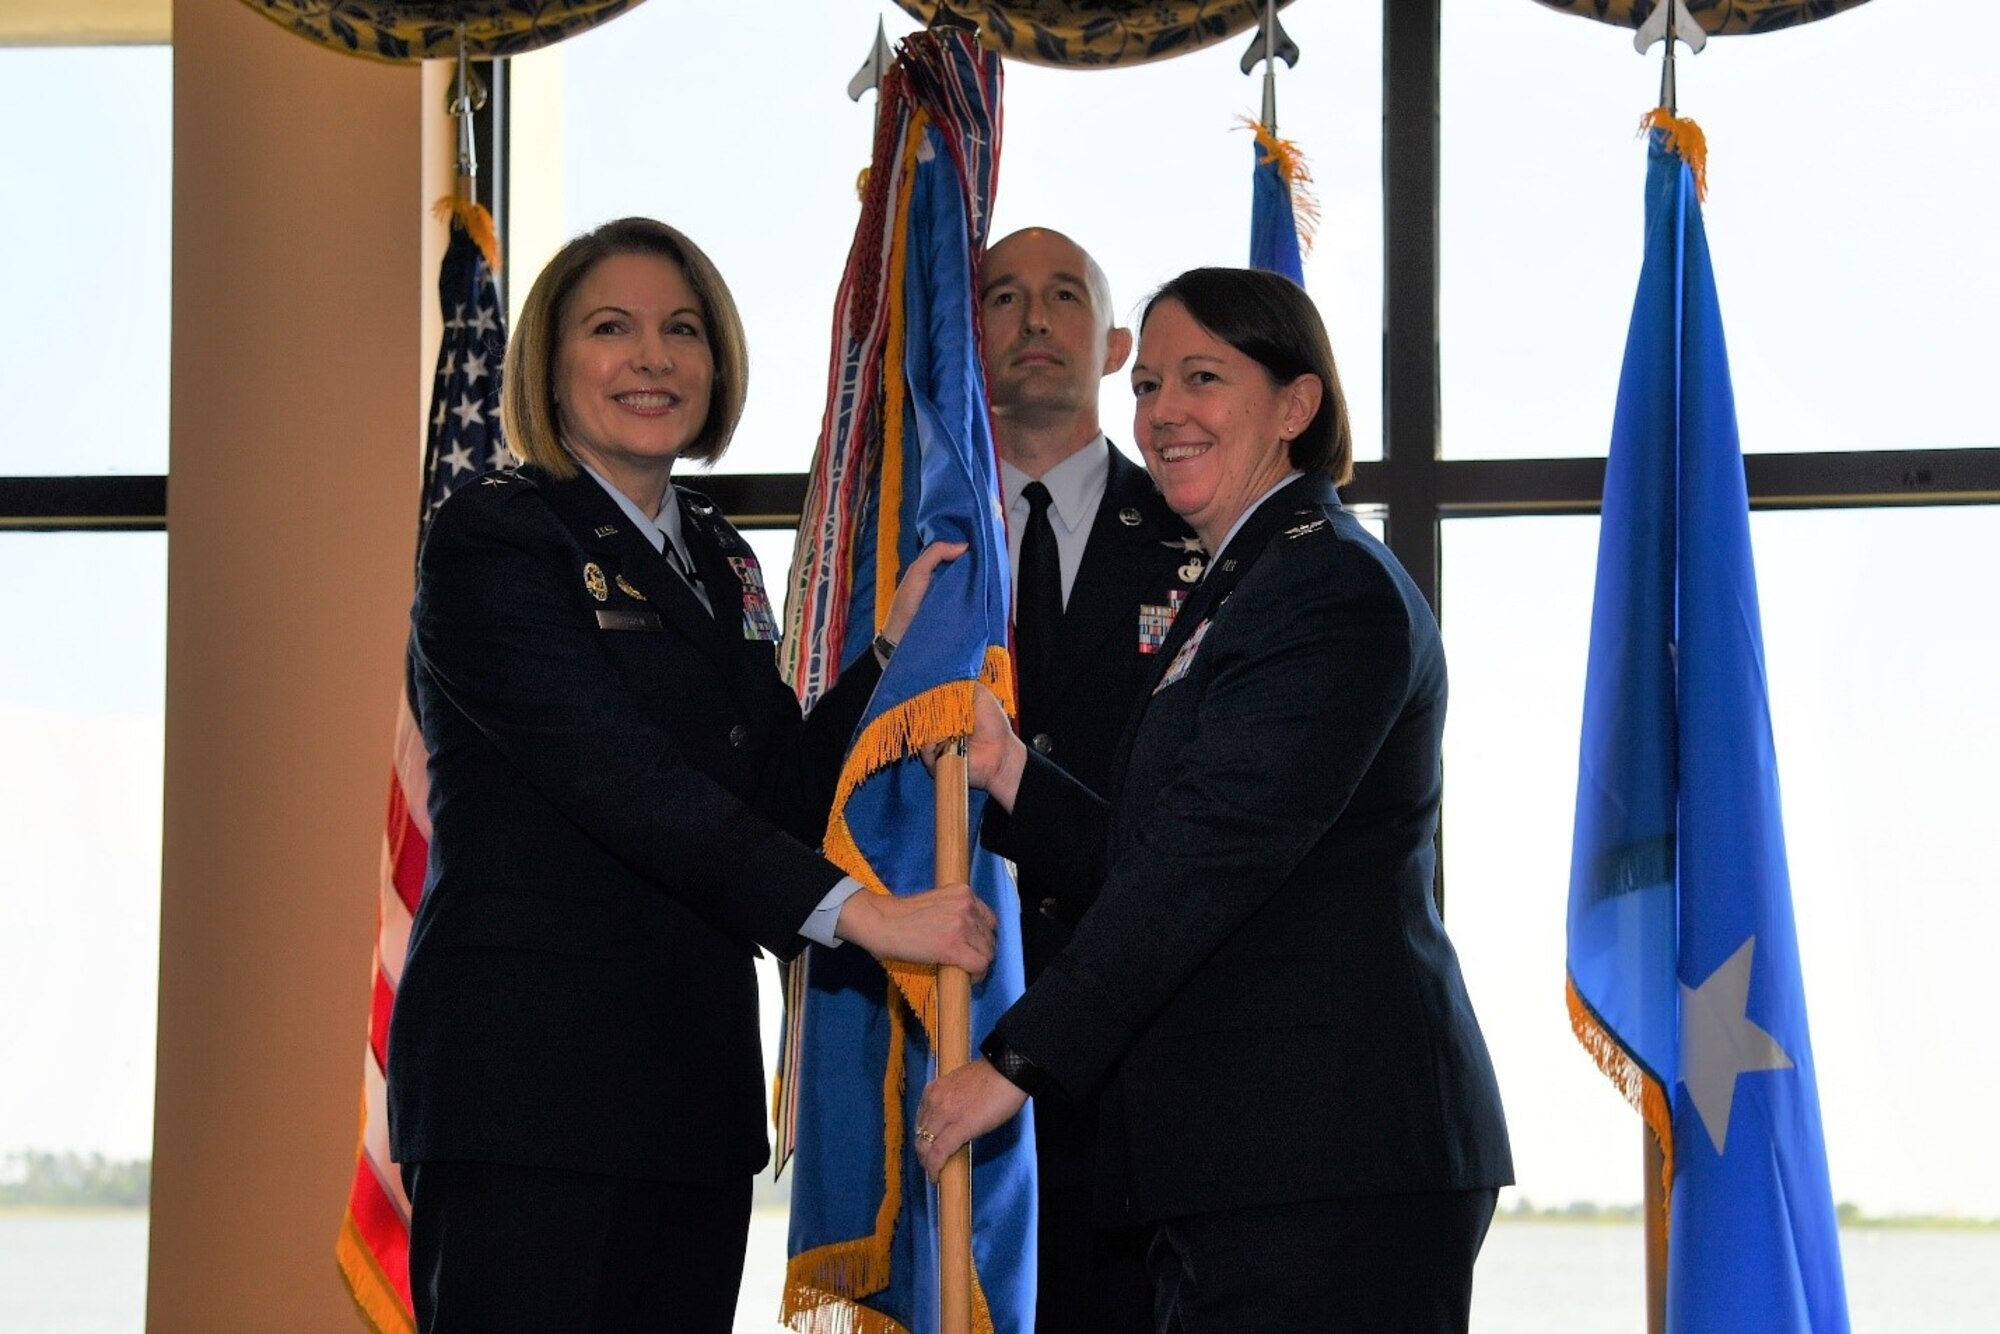 U.S. Air Force Maj. Gen. Mary F. O’Brien, Twenty-Fifth Air Force commander, passes the guidon to Col. Melissa A. Stone during the 363d Intelligence, Surveillance and Reconnaissance Wing assumption of command ceremony at Joint Base Langley-Eustis, Virginia, May 30, 2019. The 363d ISRW conducts lethal, resilient and ready operations across four key mission areas: analysis of air, space and cyber operations; full-spectrum targeting; special operations ISR; and ISR testing, tactics development and advanced training. (U.S. Air Force photo by Robert Mehal)